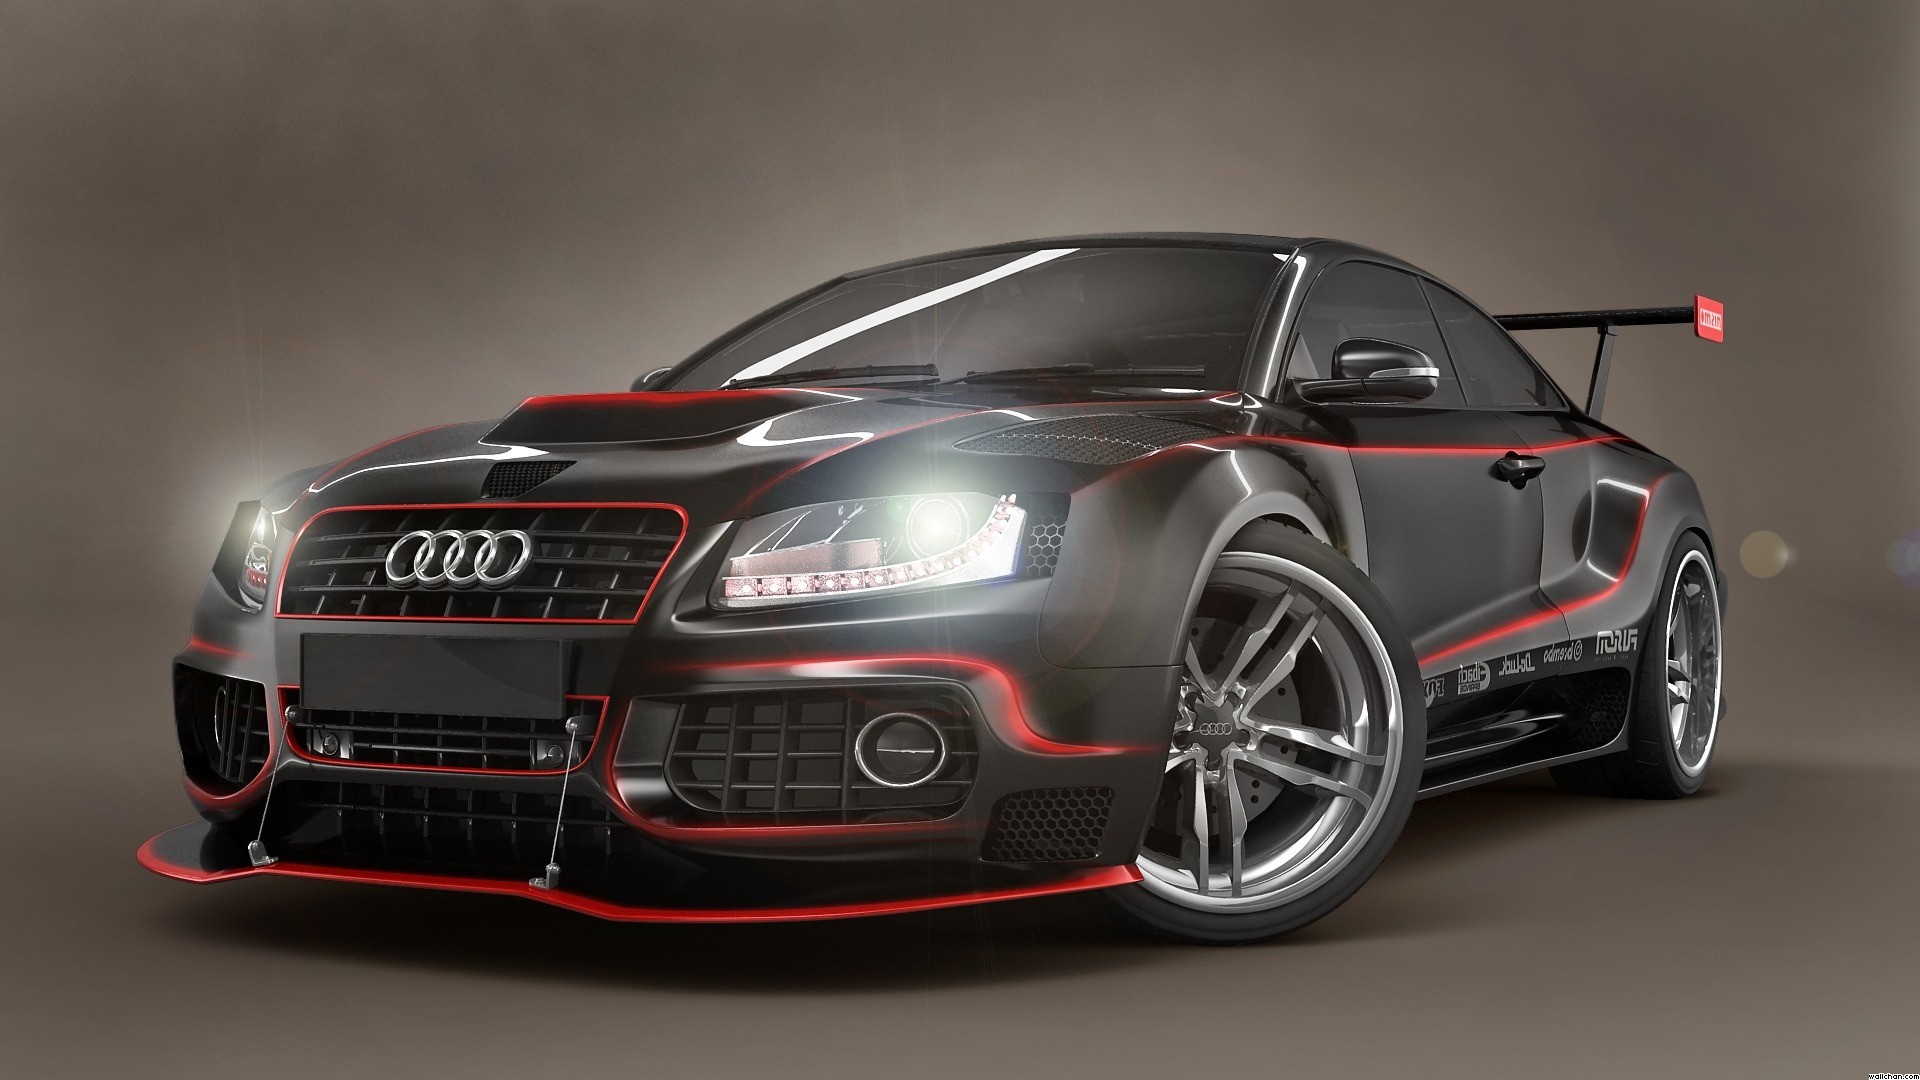 Audi Cars Wallpapers 72 Images